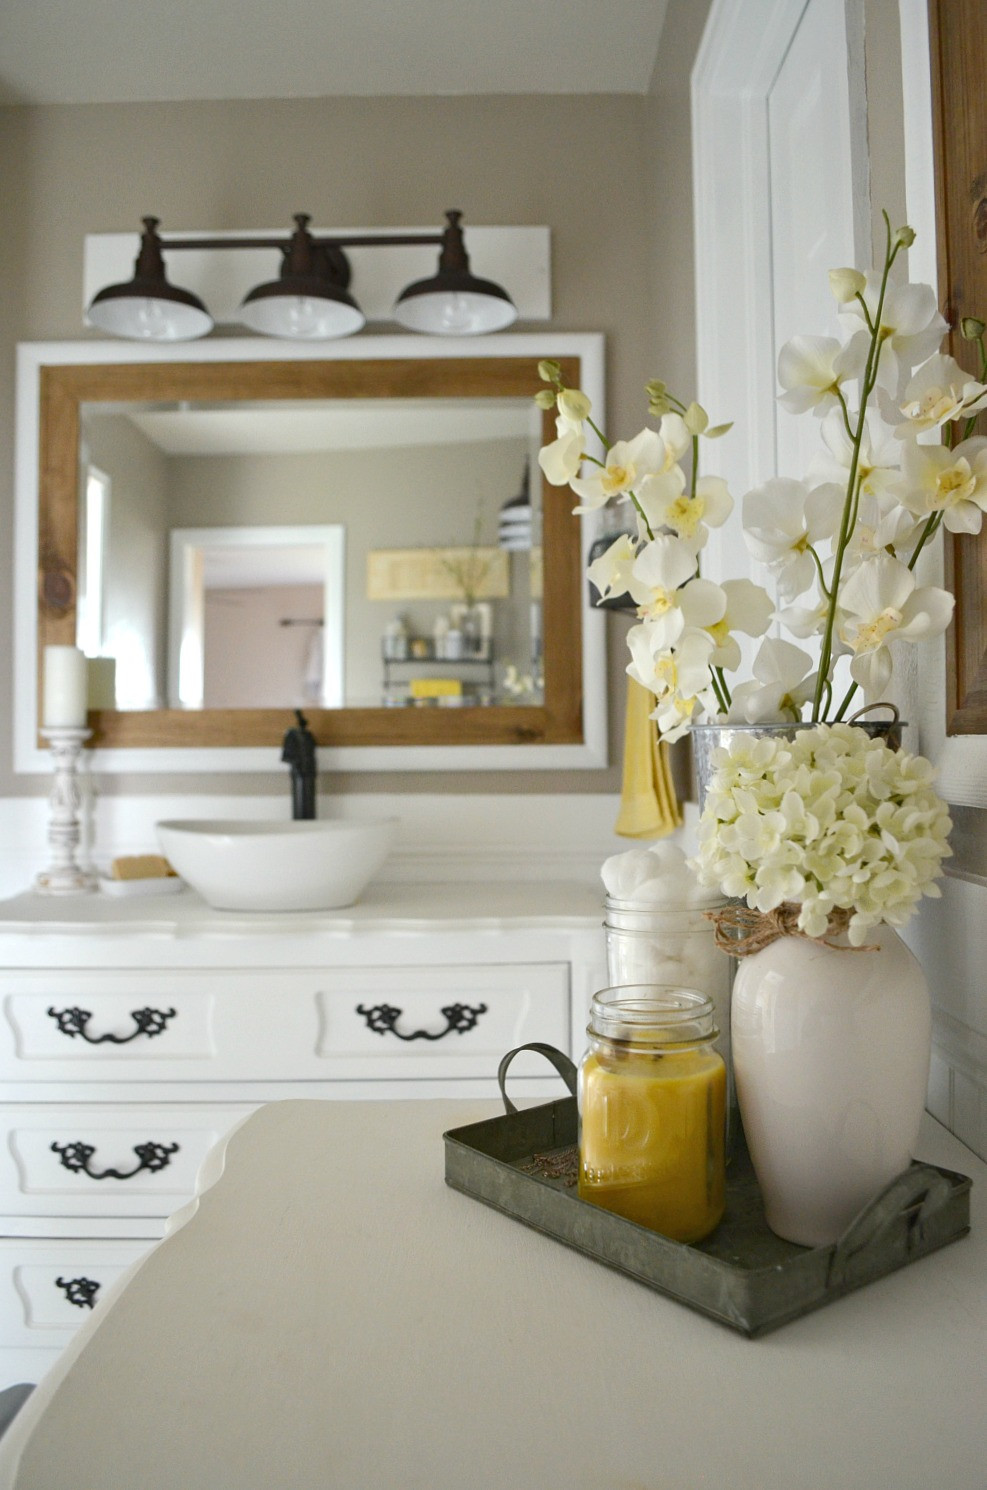 Vintage Bathroom Decorating Ideas
 How to Easily Mix Vintage and Modern Decor Little